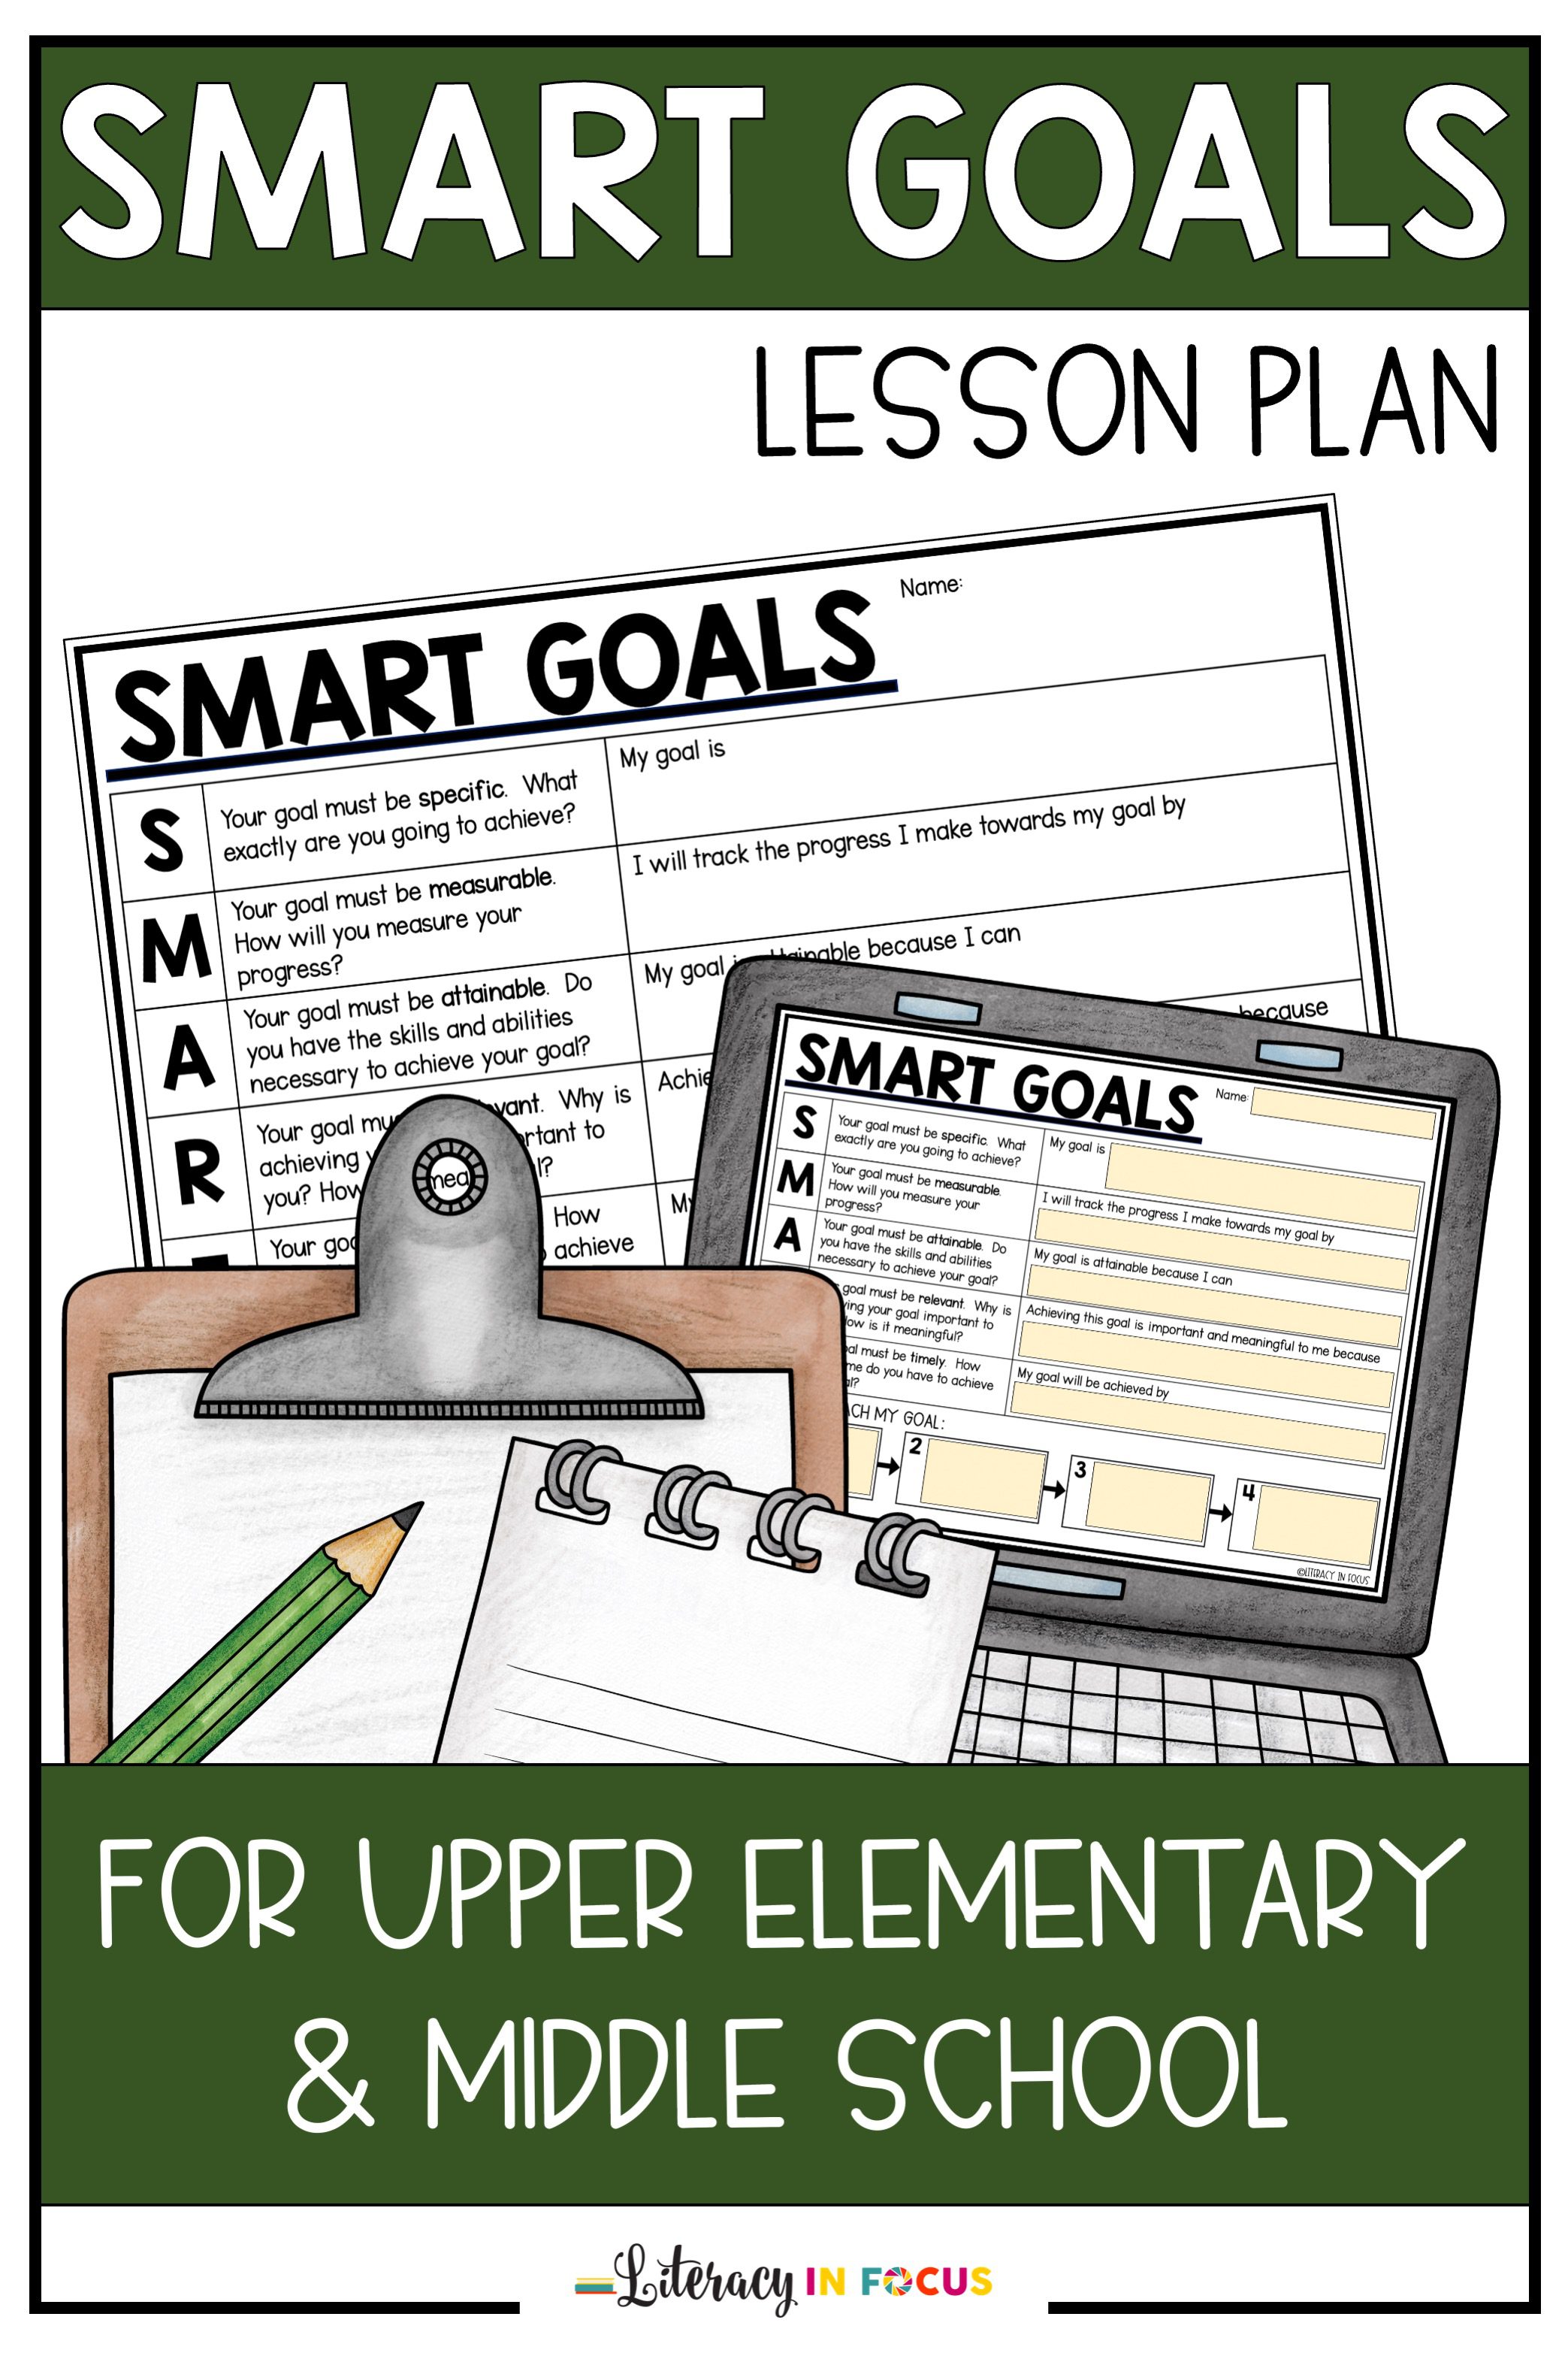 Free SMART Goals Planning Template for Elementary and Middle School Students